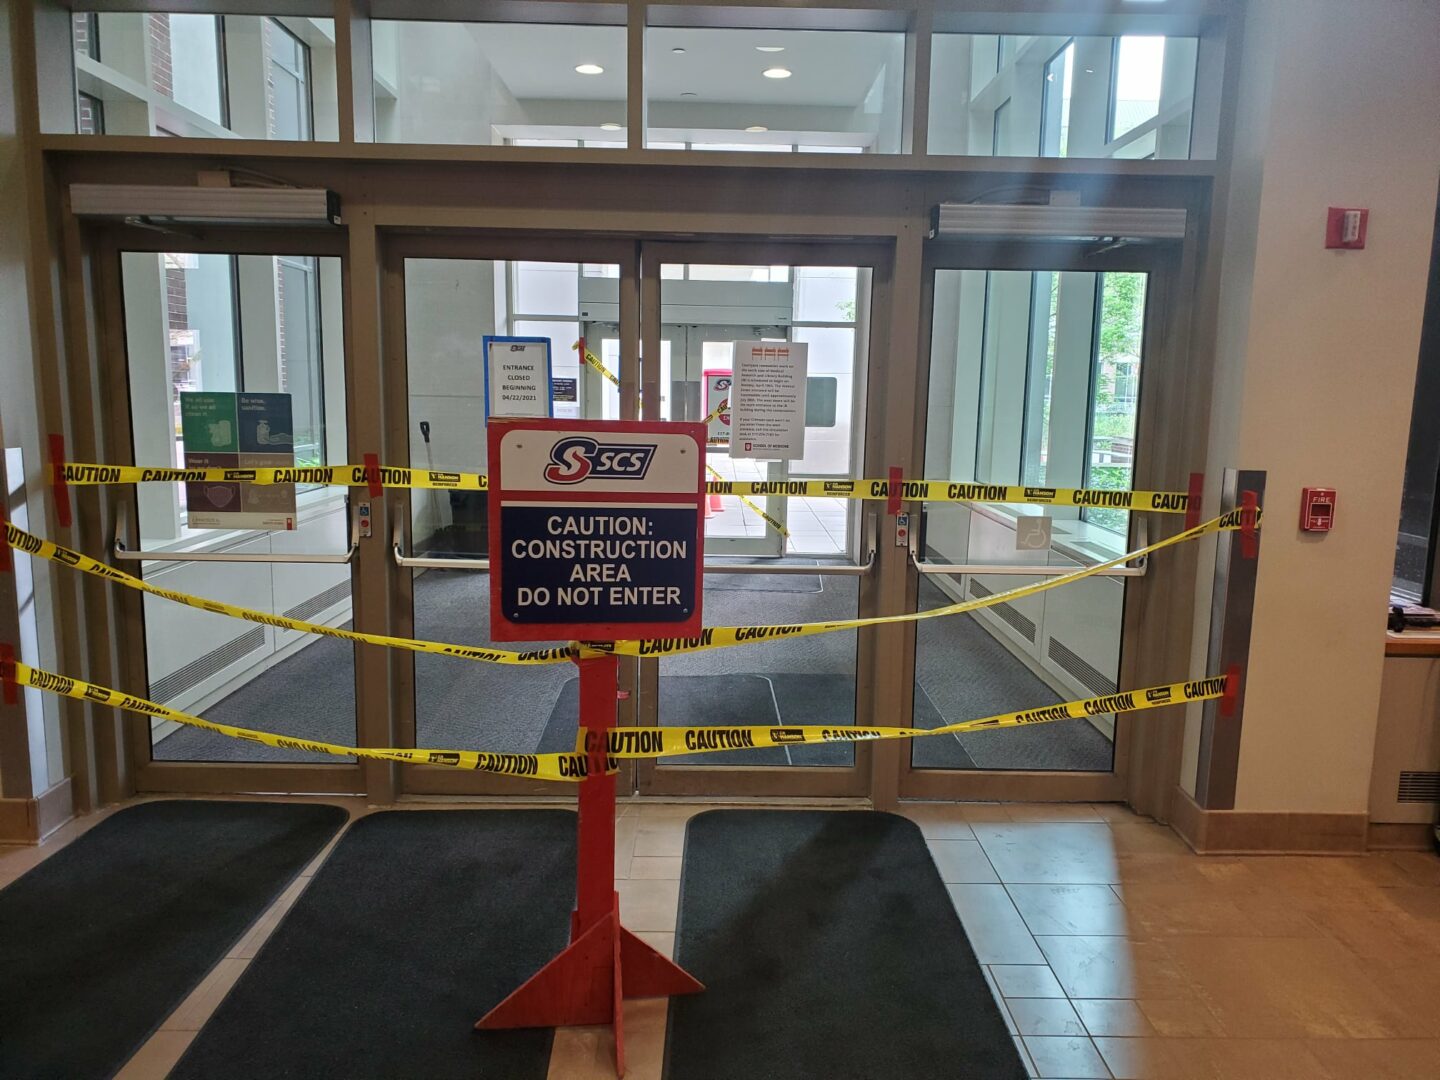 an image of caution tape around the north entrace of the library, due to renovation.